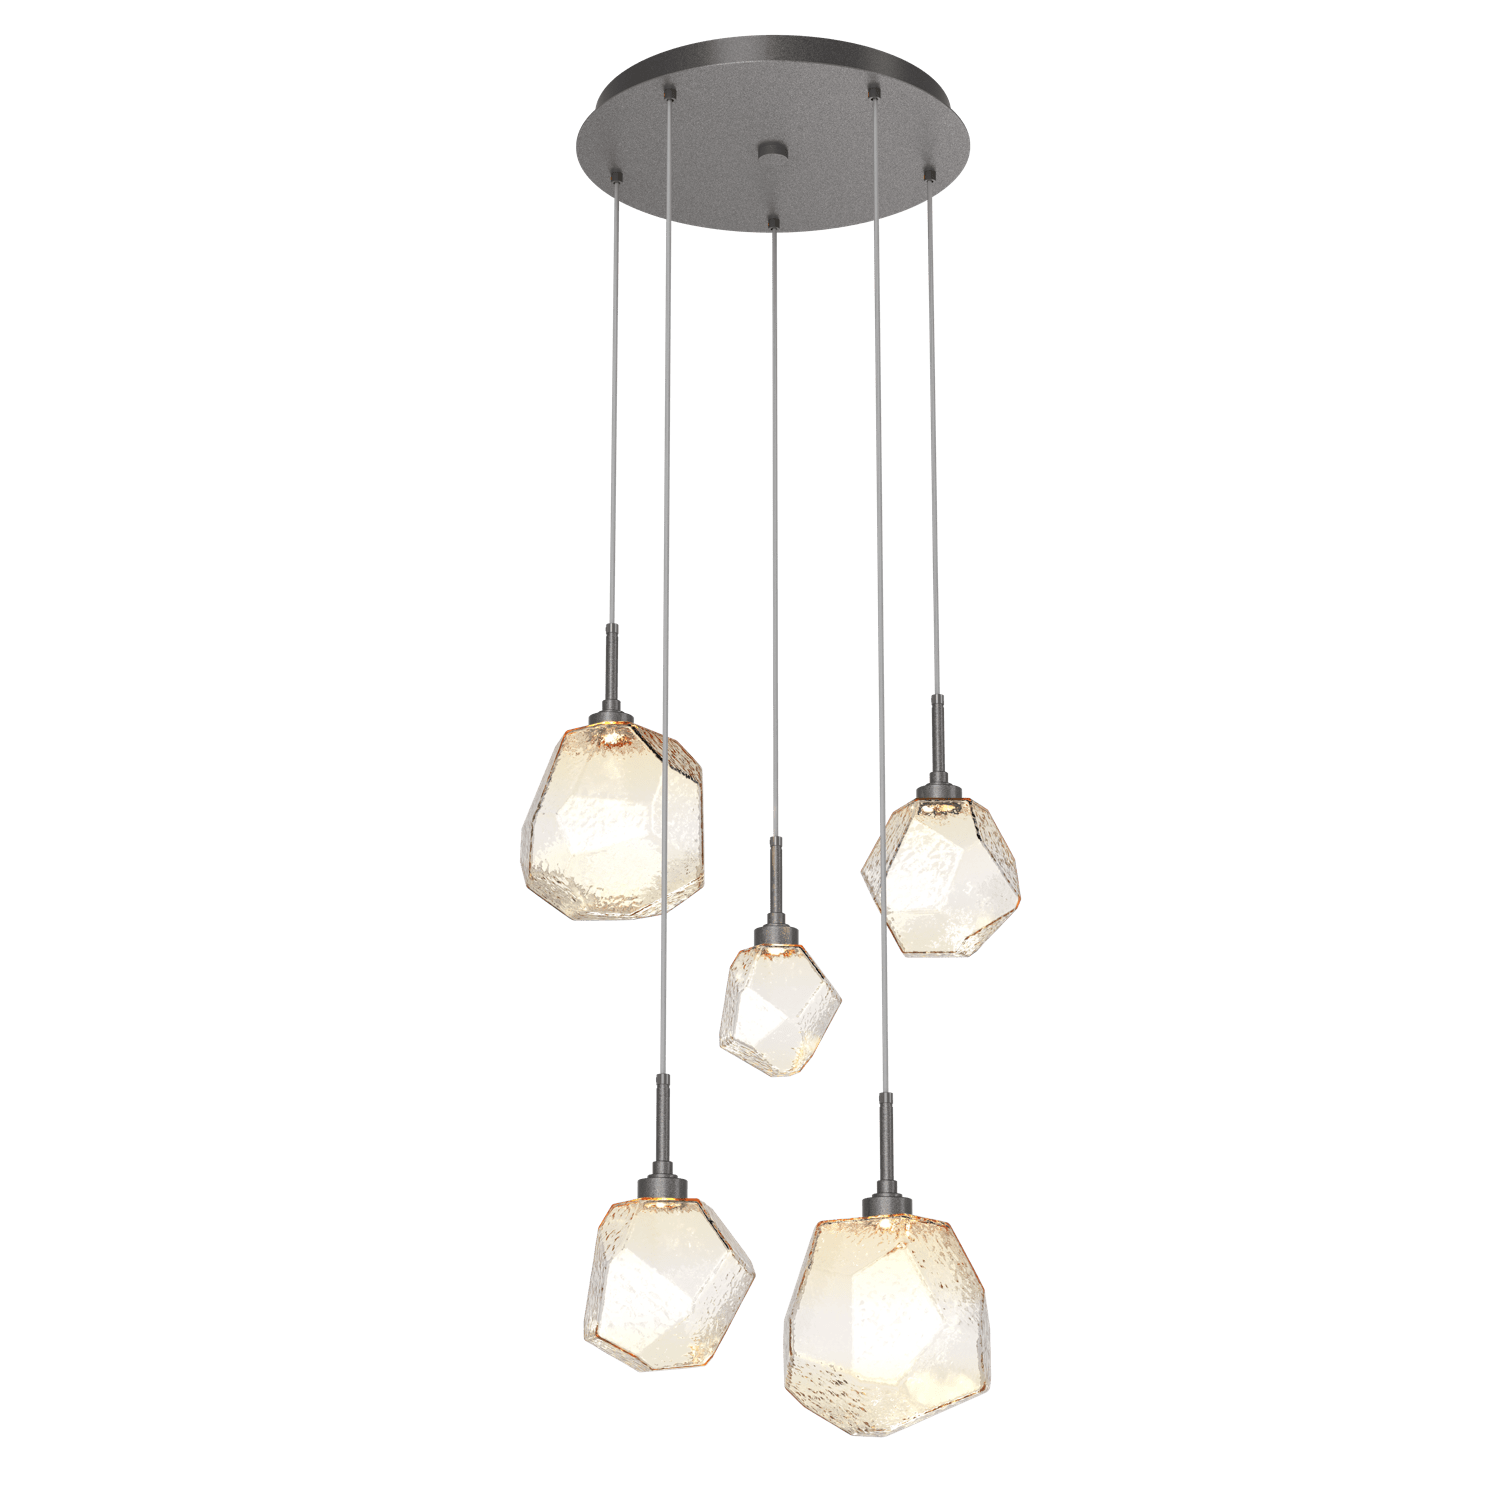 CHB0039-05-GP-A-Hammerton-Studio-Gem-5-light-round-pendant-chandelier-with-graphite-finish-and-amber-blown-glass-shades-and-LED-lamping